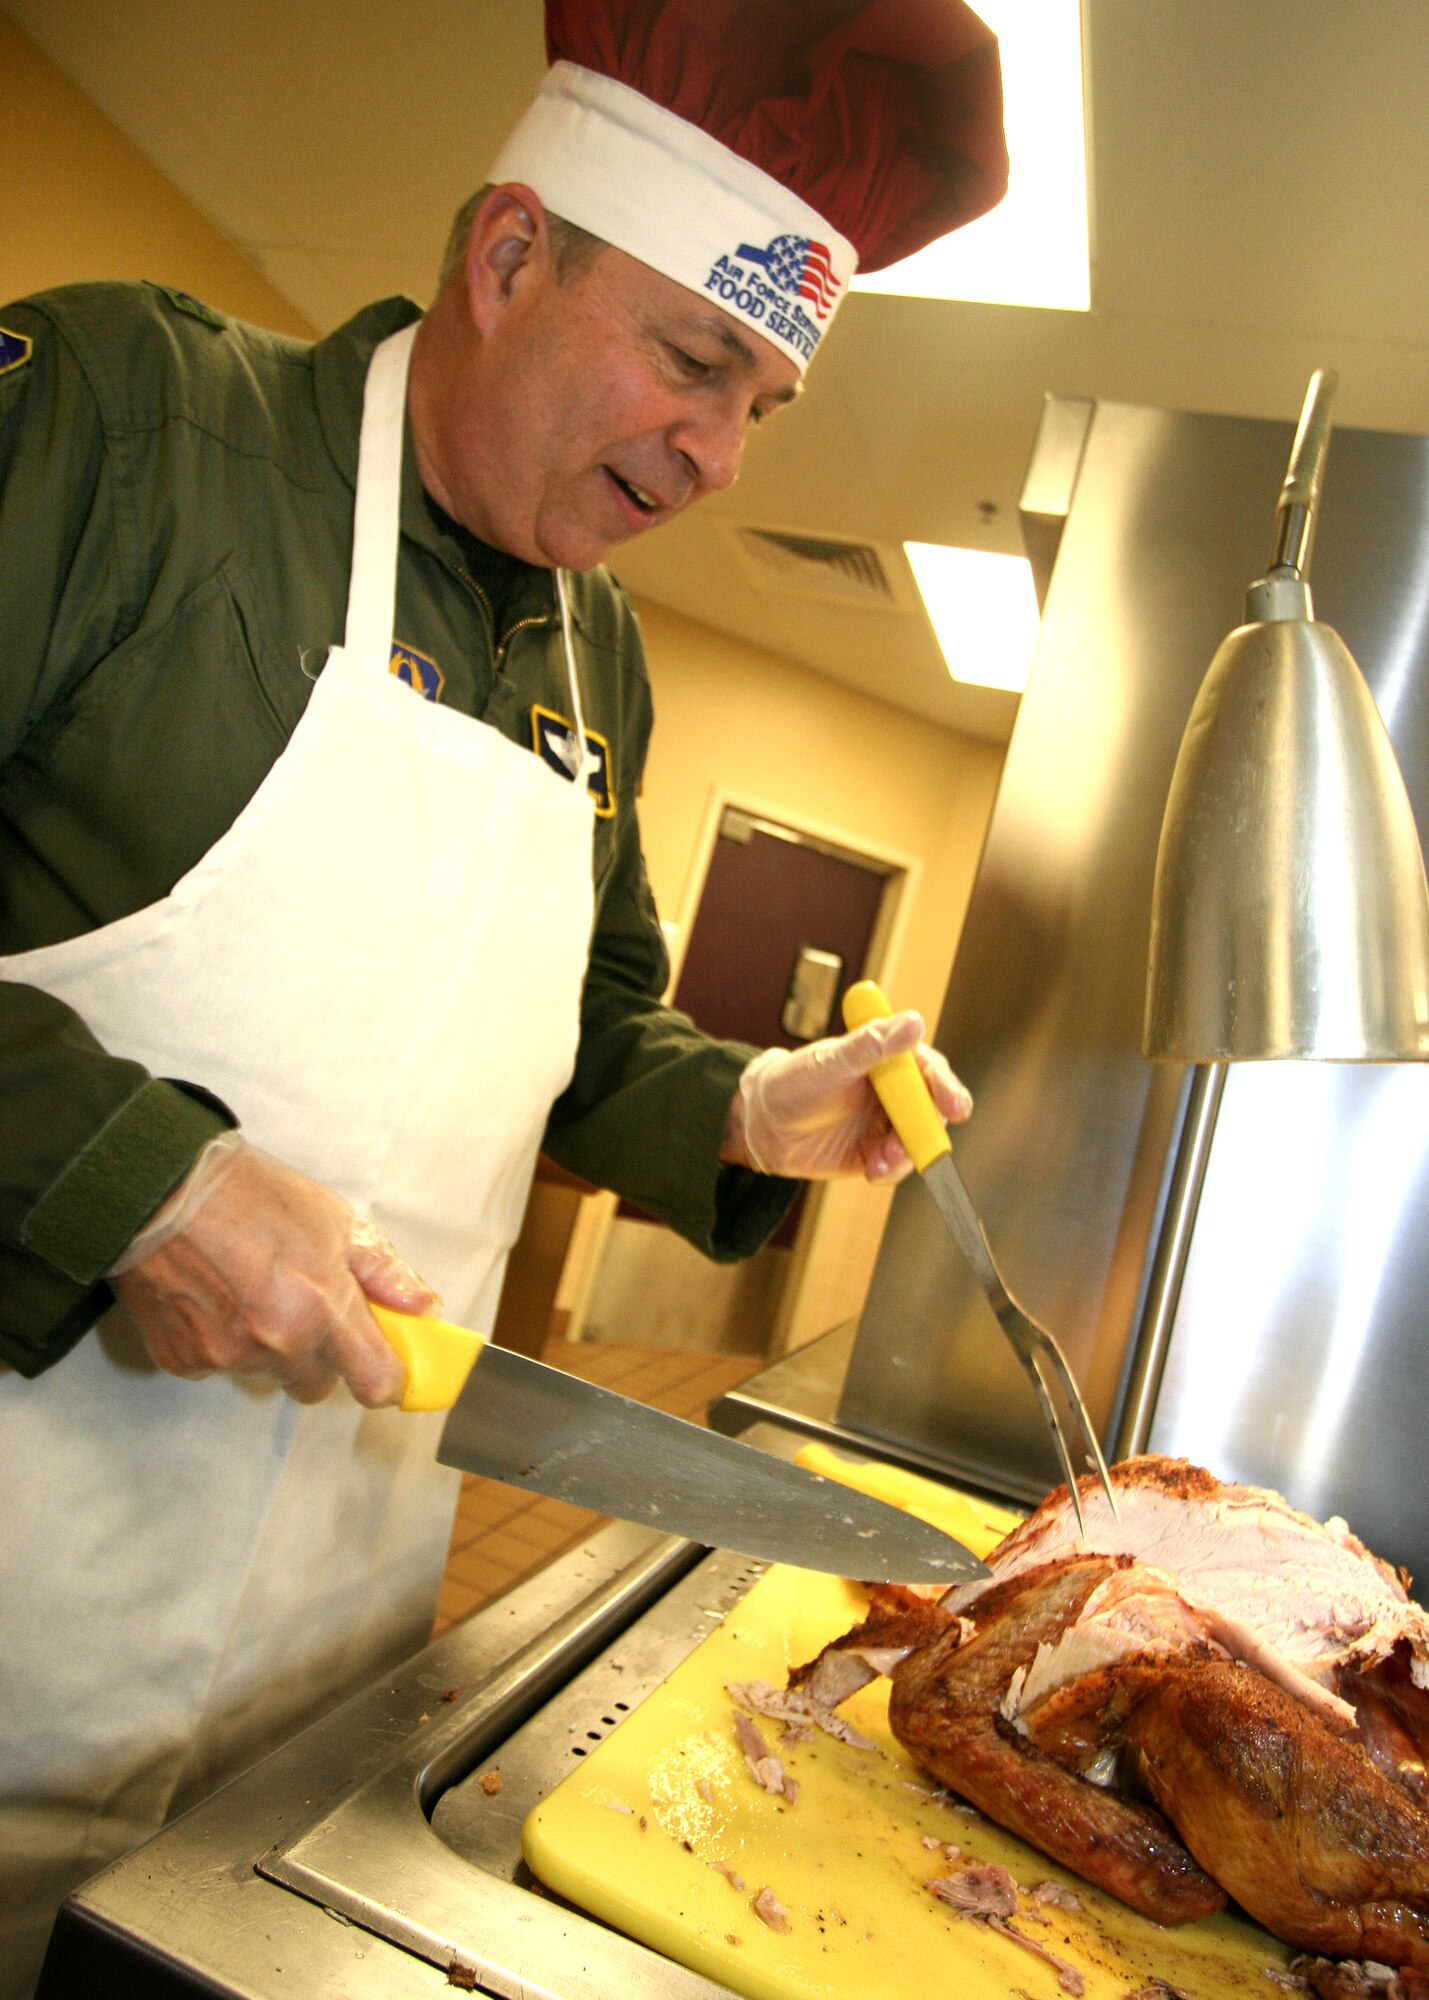 GRISSOM AIR RESERVE BASE, Ind., -- Brig Gen. Dean Despinoy, 434th Air Refueling Wing commander, carves up a turkey to serve to Airmen during the December unit training assembly. It is an annual tradition for commanders and senior leadership at Grissom to serve the Holiday meal to other unit members. (U.S. Air Force photo/Tech. Sgt. Patrick Kuminecz)